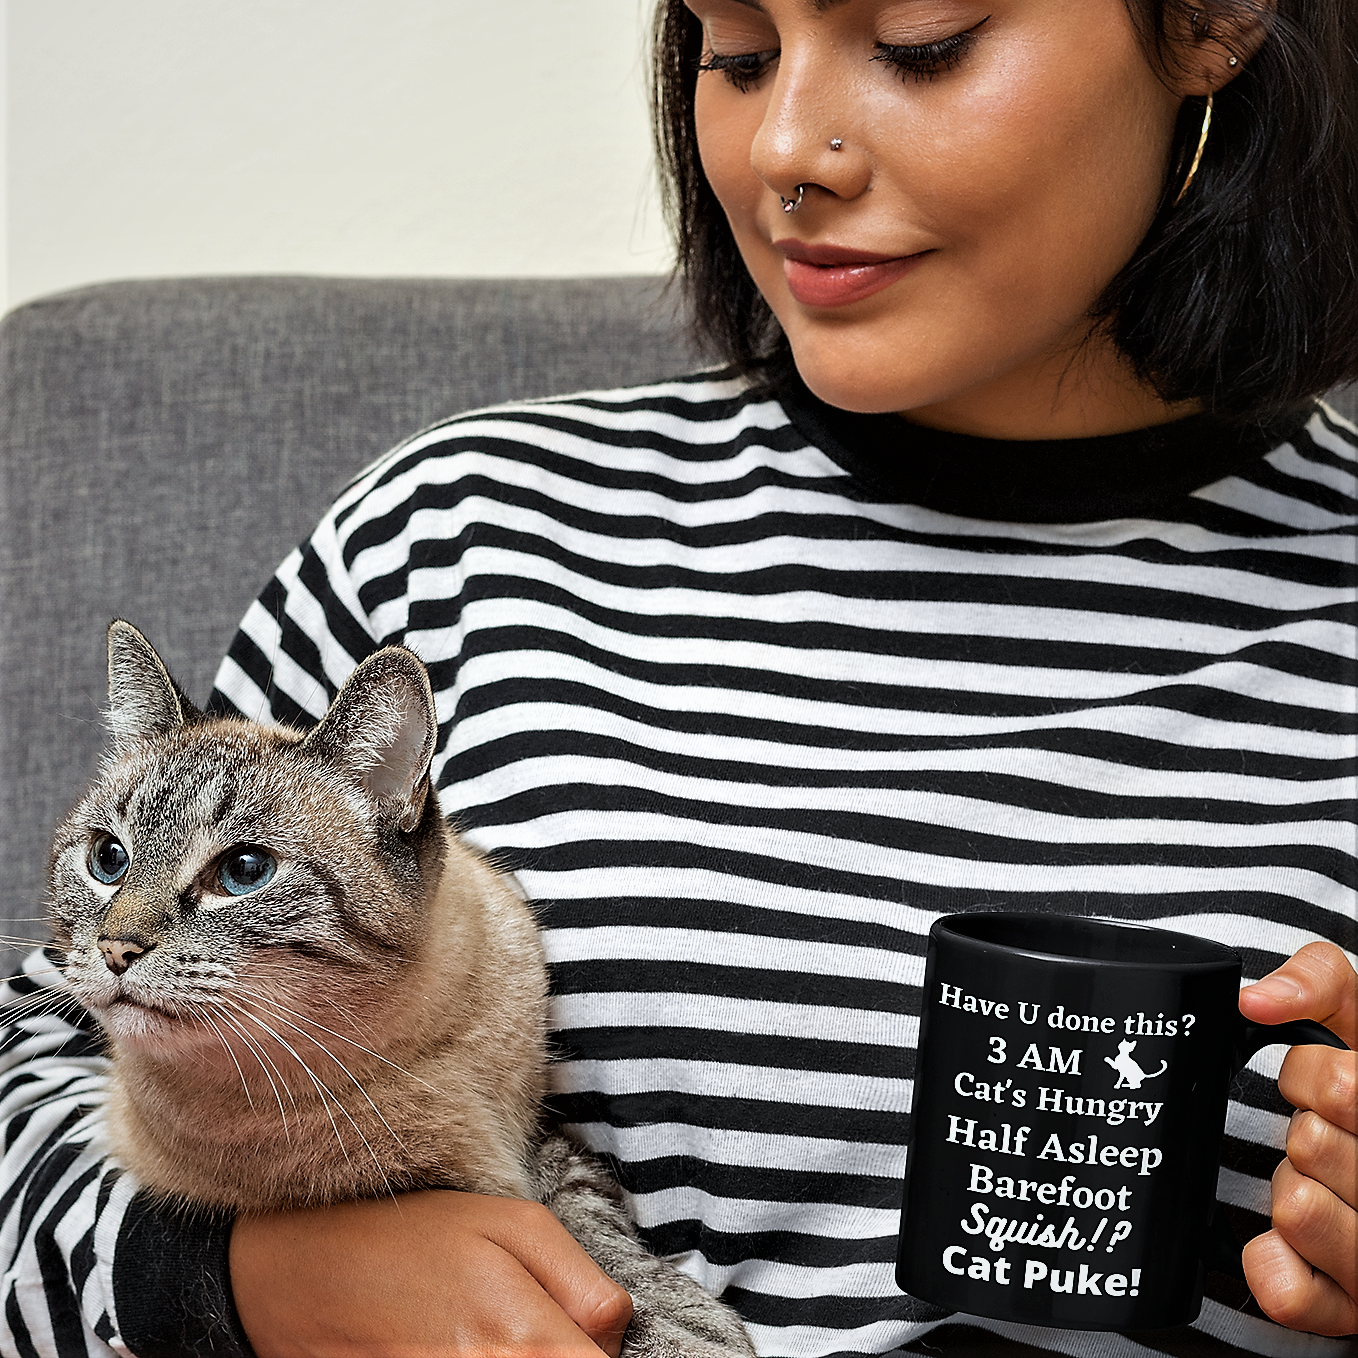 christmas gift for cat lover lady, funny cat gift, cat coffee mug